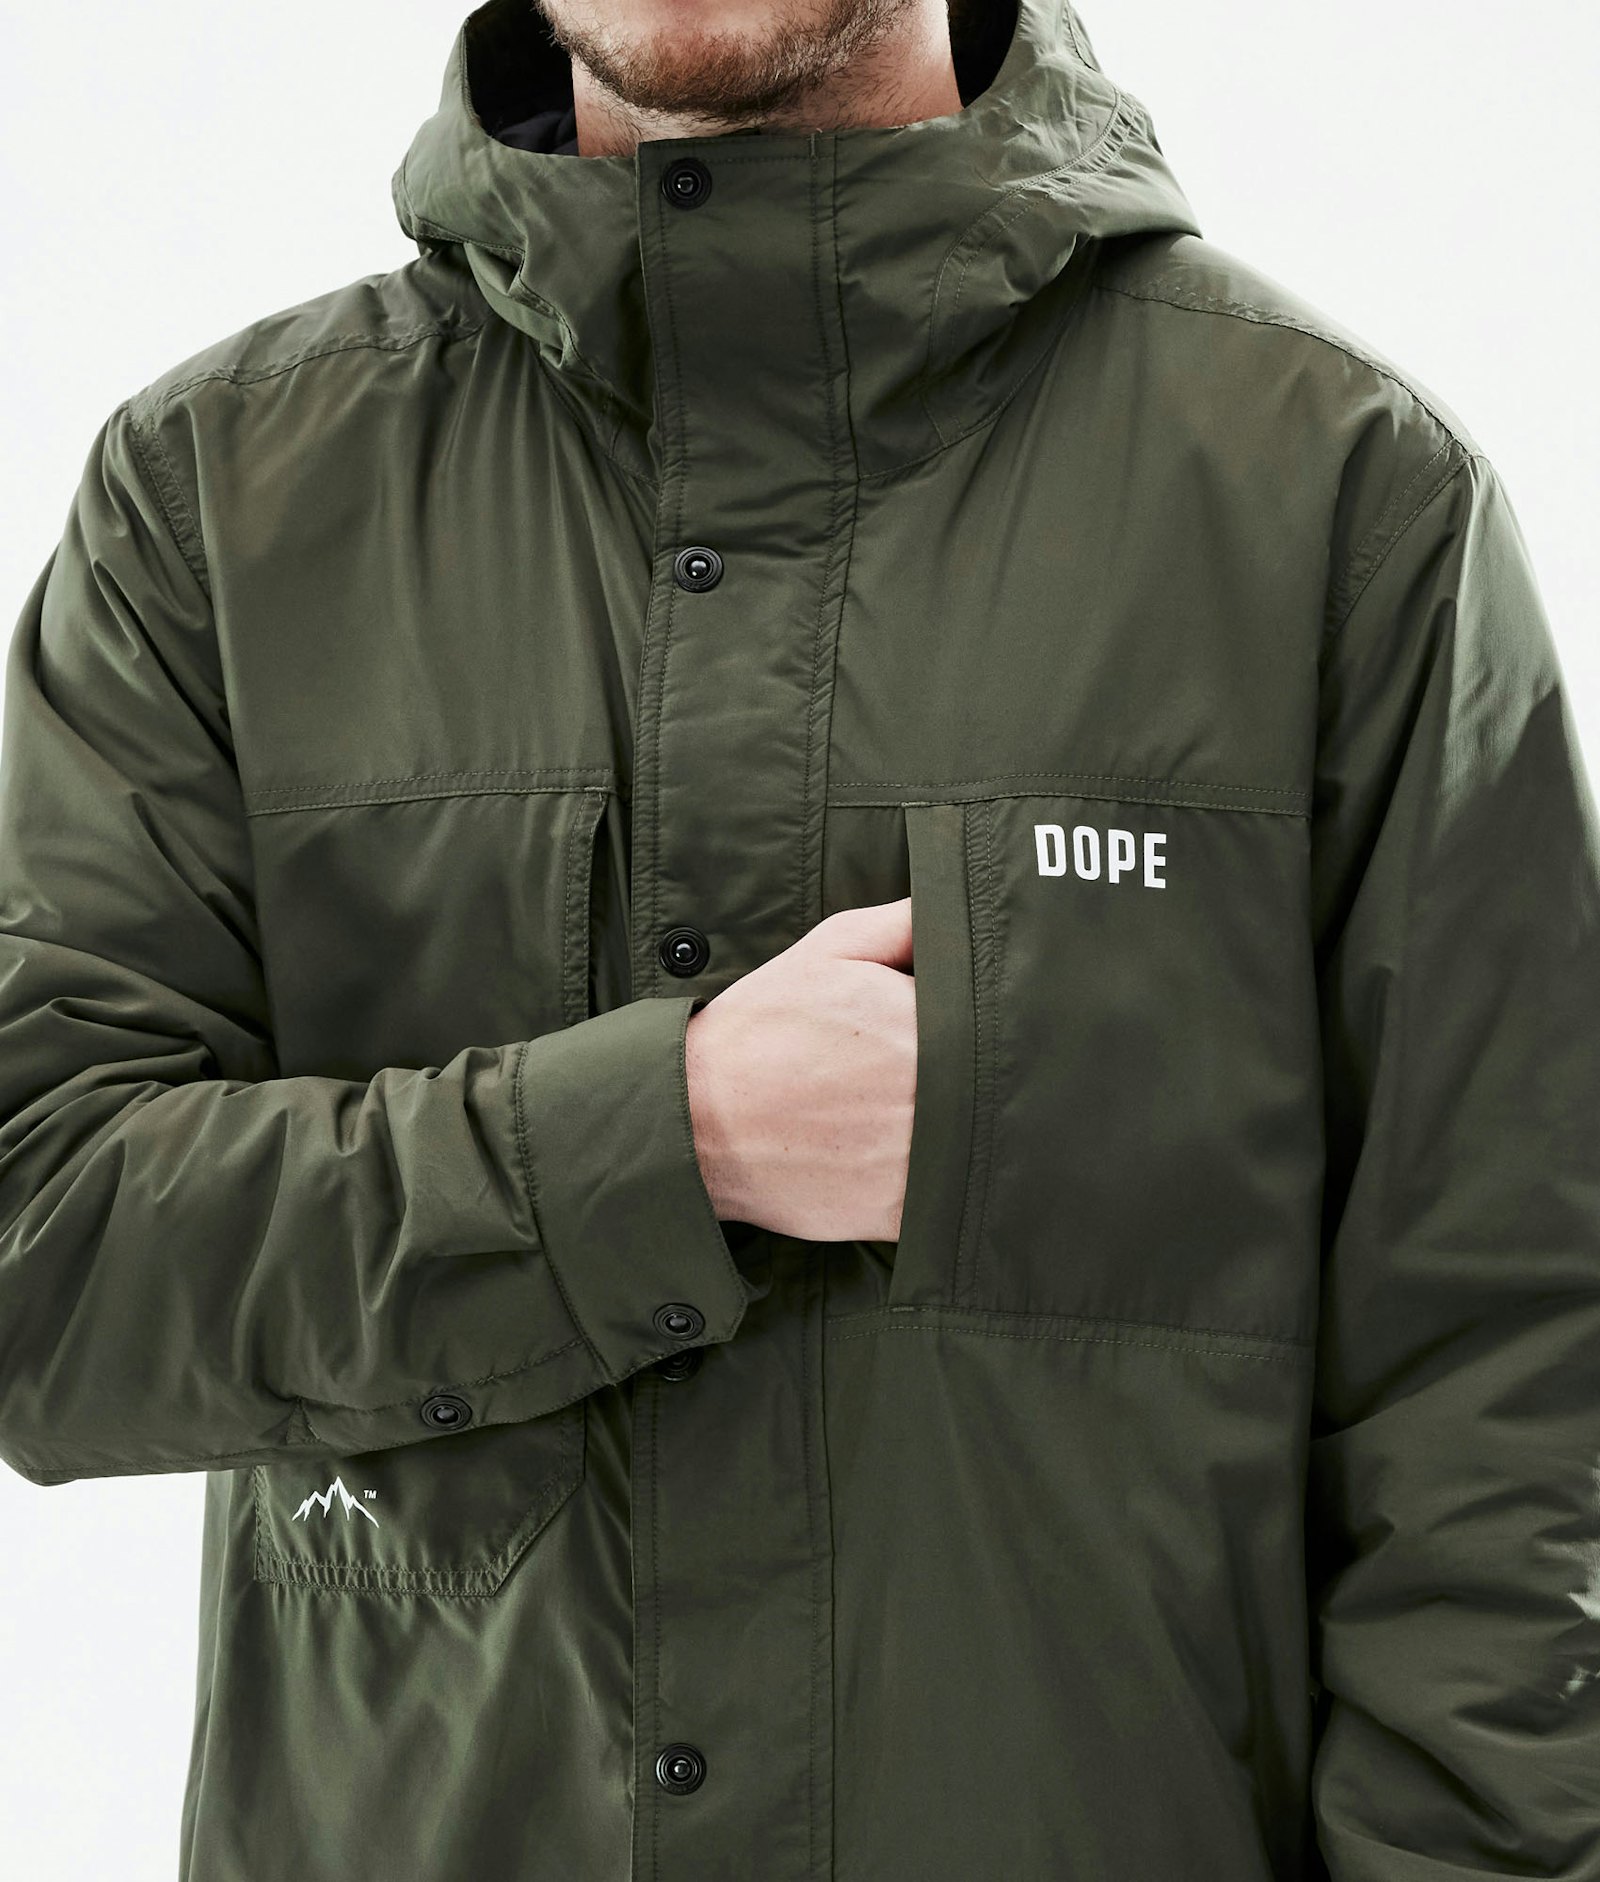 Insulated Giacca Midlayer Outdoor Uomo Olive Green